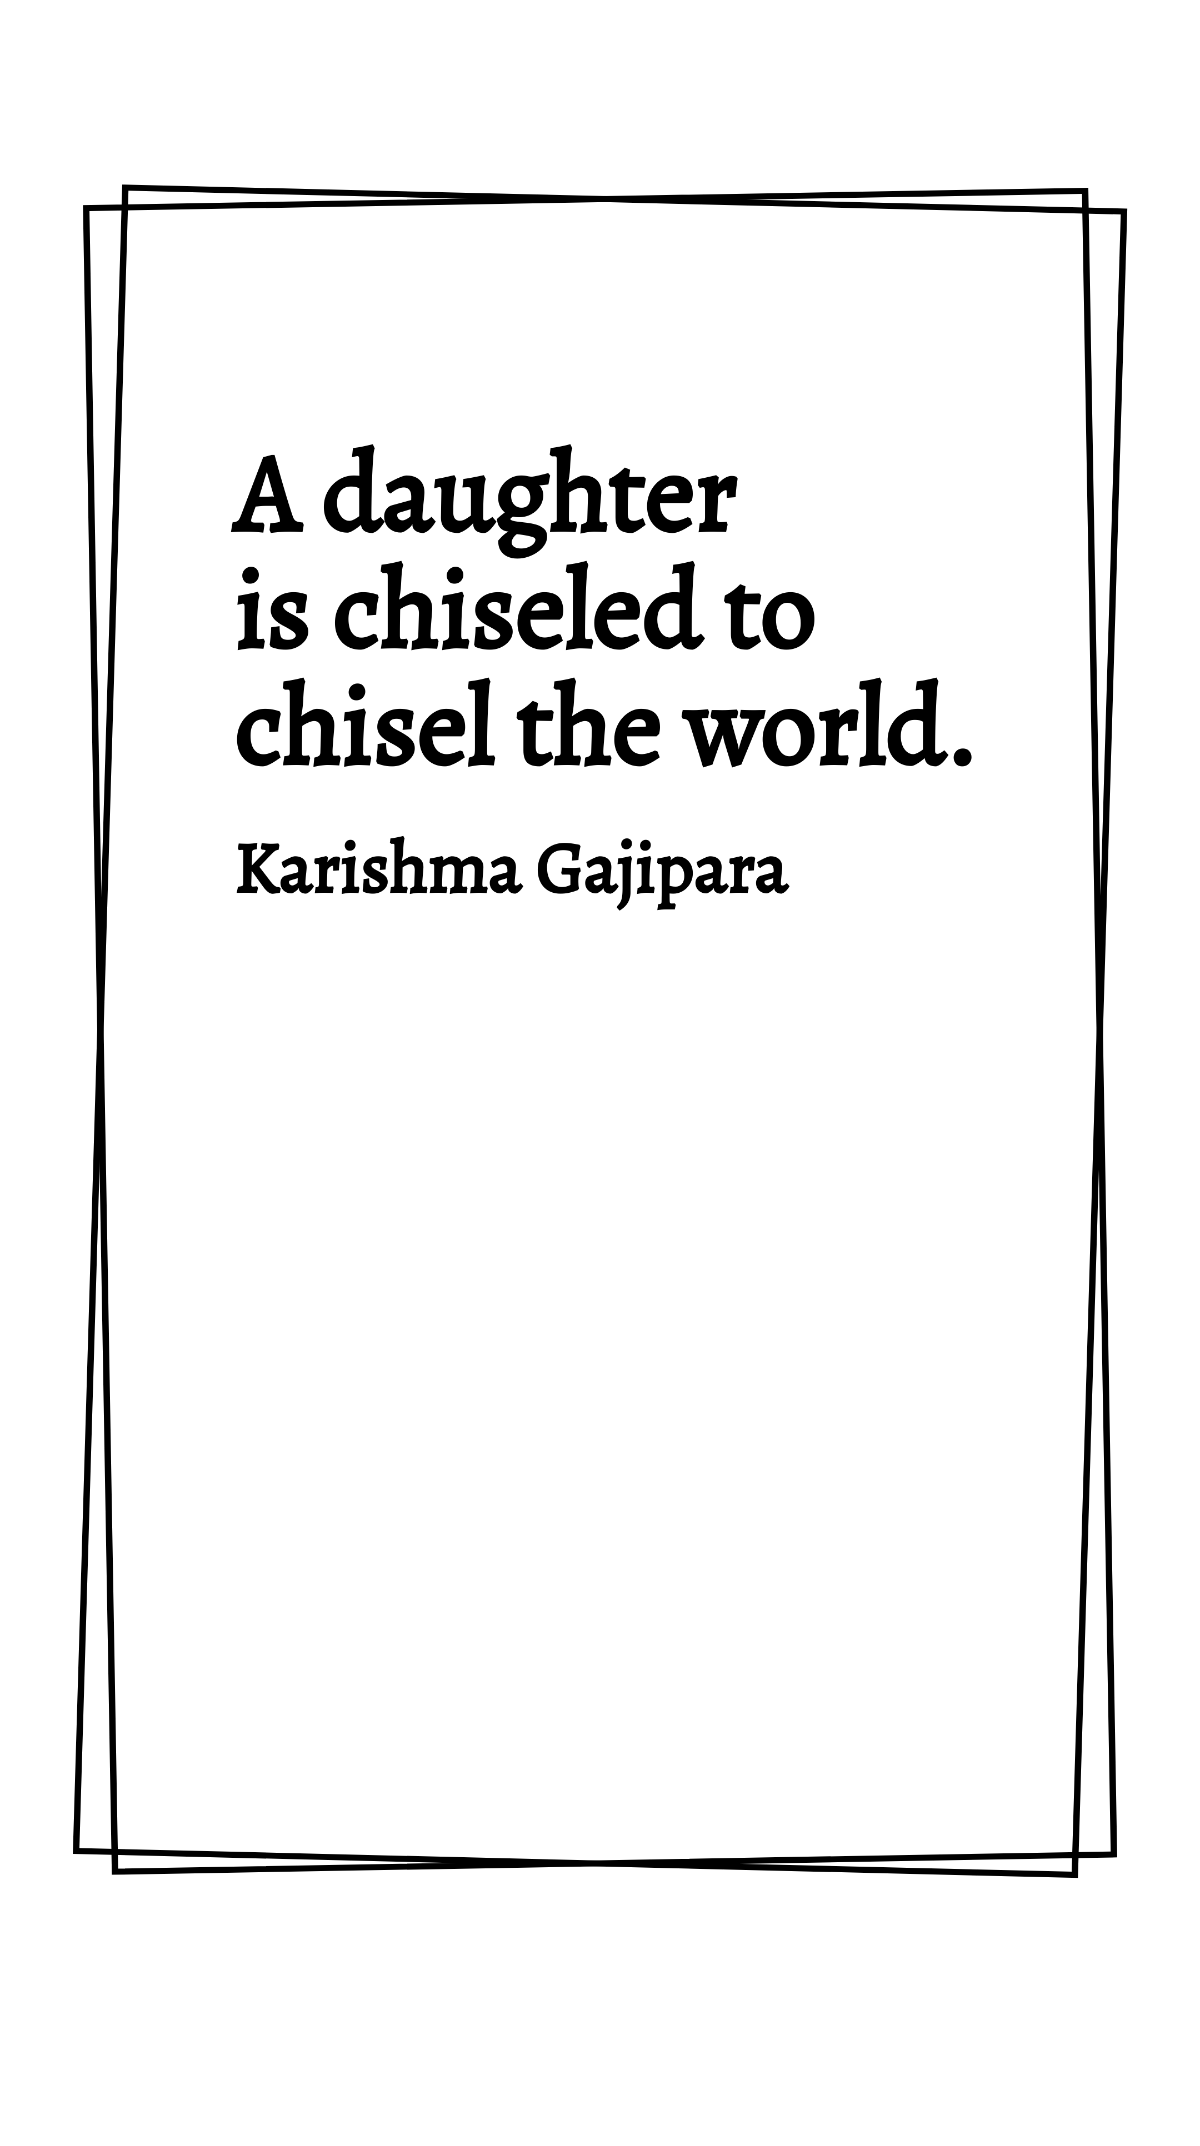 Free Karishma Gajipara - A daughter is chiseled to chisel the world. Template